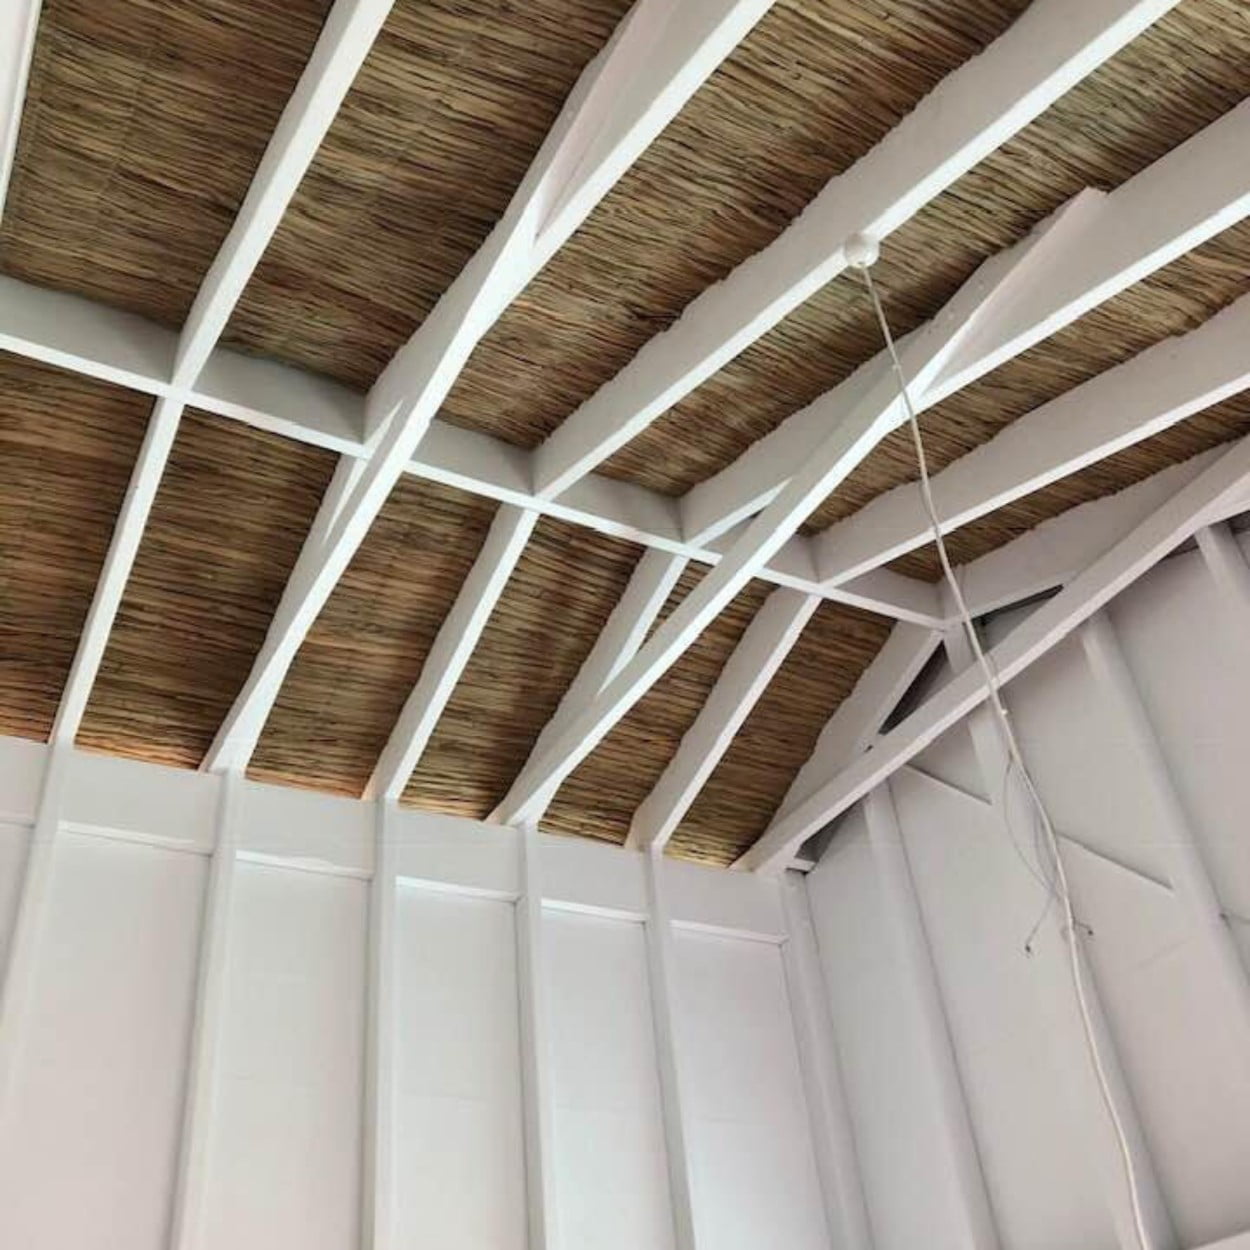 Palm Fibre and White Exposed Beams Ceiling